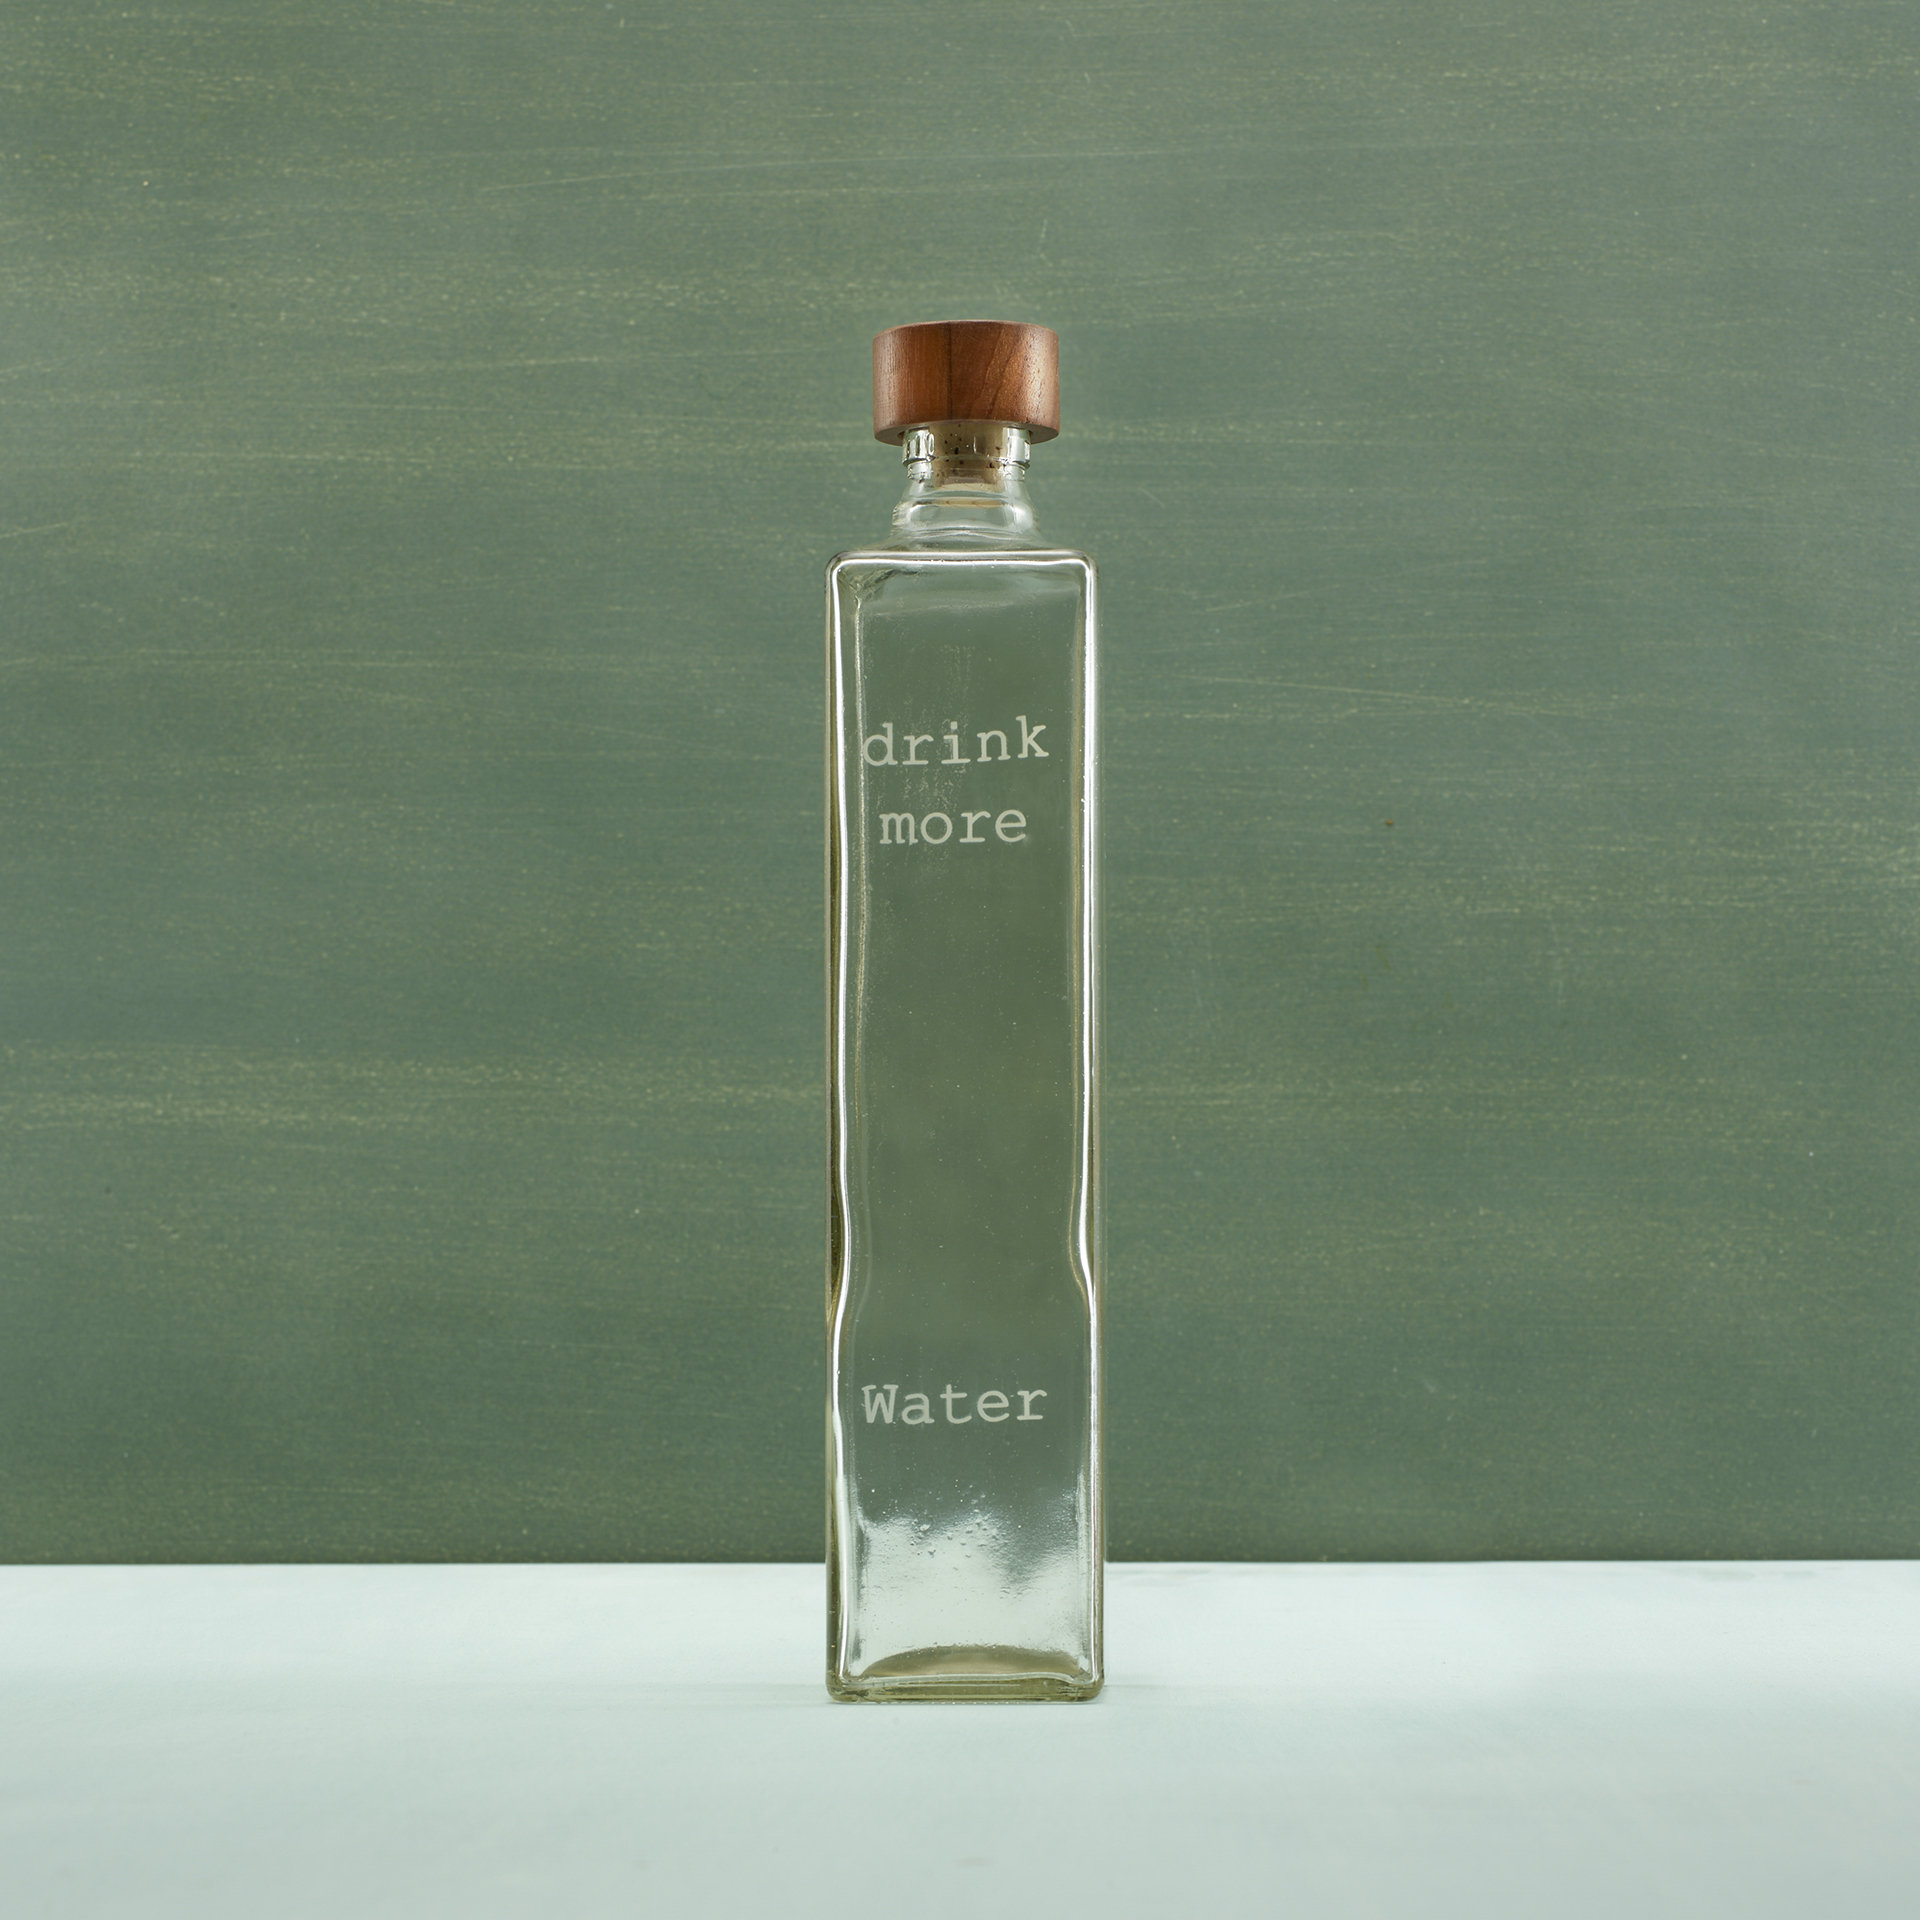 Buy Everyday Glass Bottle with Blue Glass Stopper Online - Ellementry